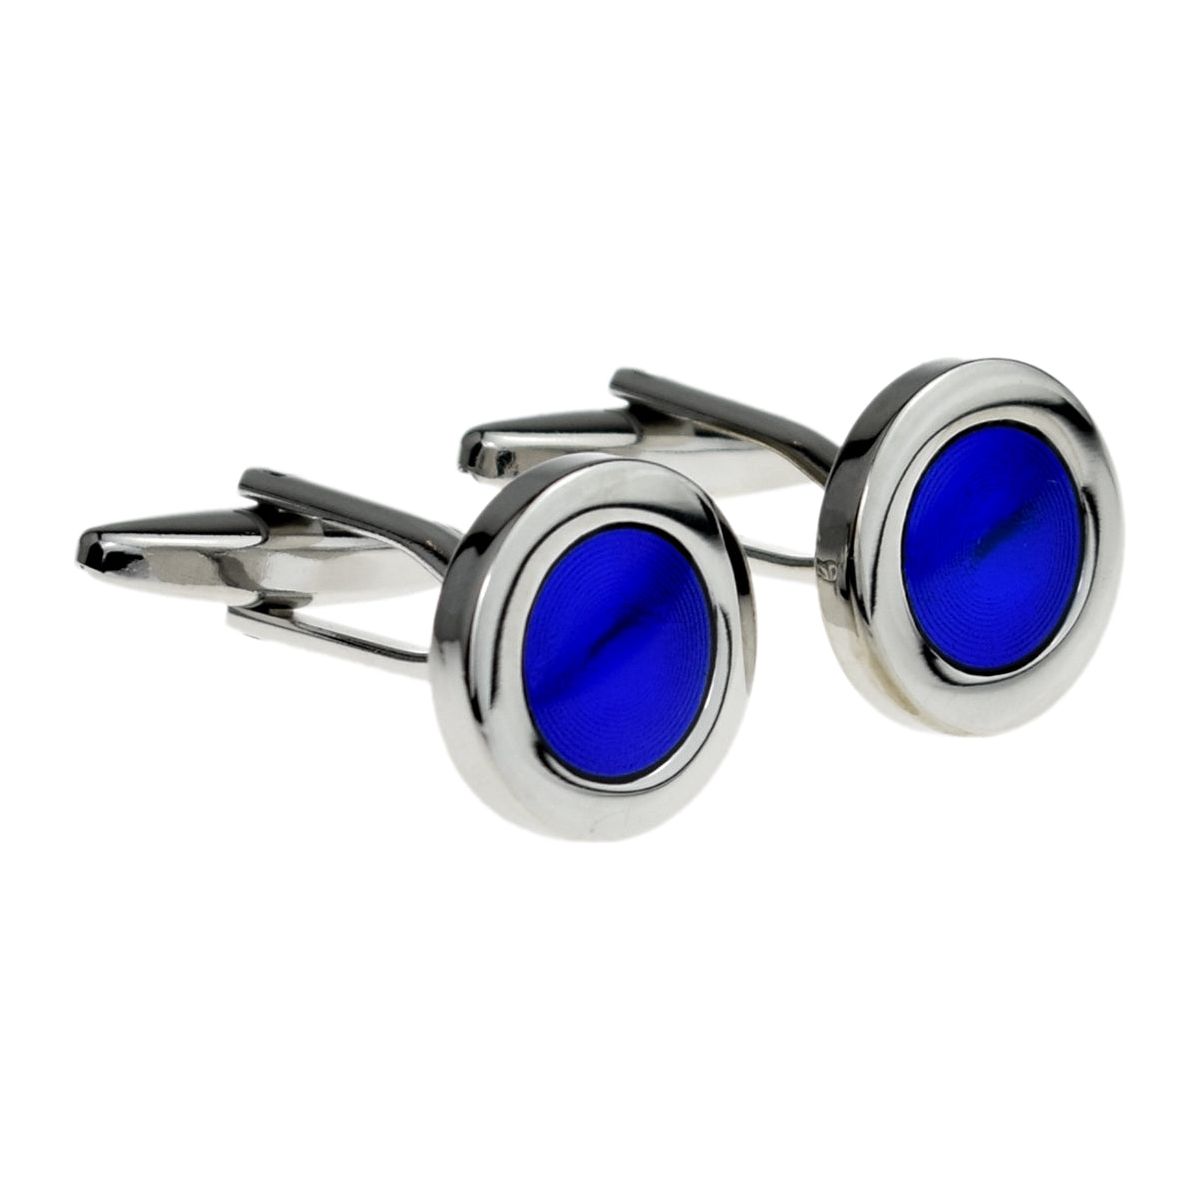 Round Cufflinks with Blue circle classic design - Ashton and Finch